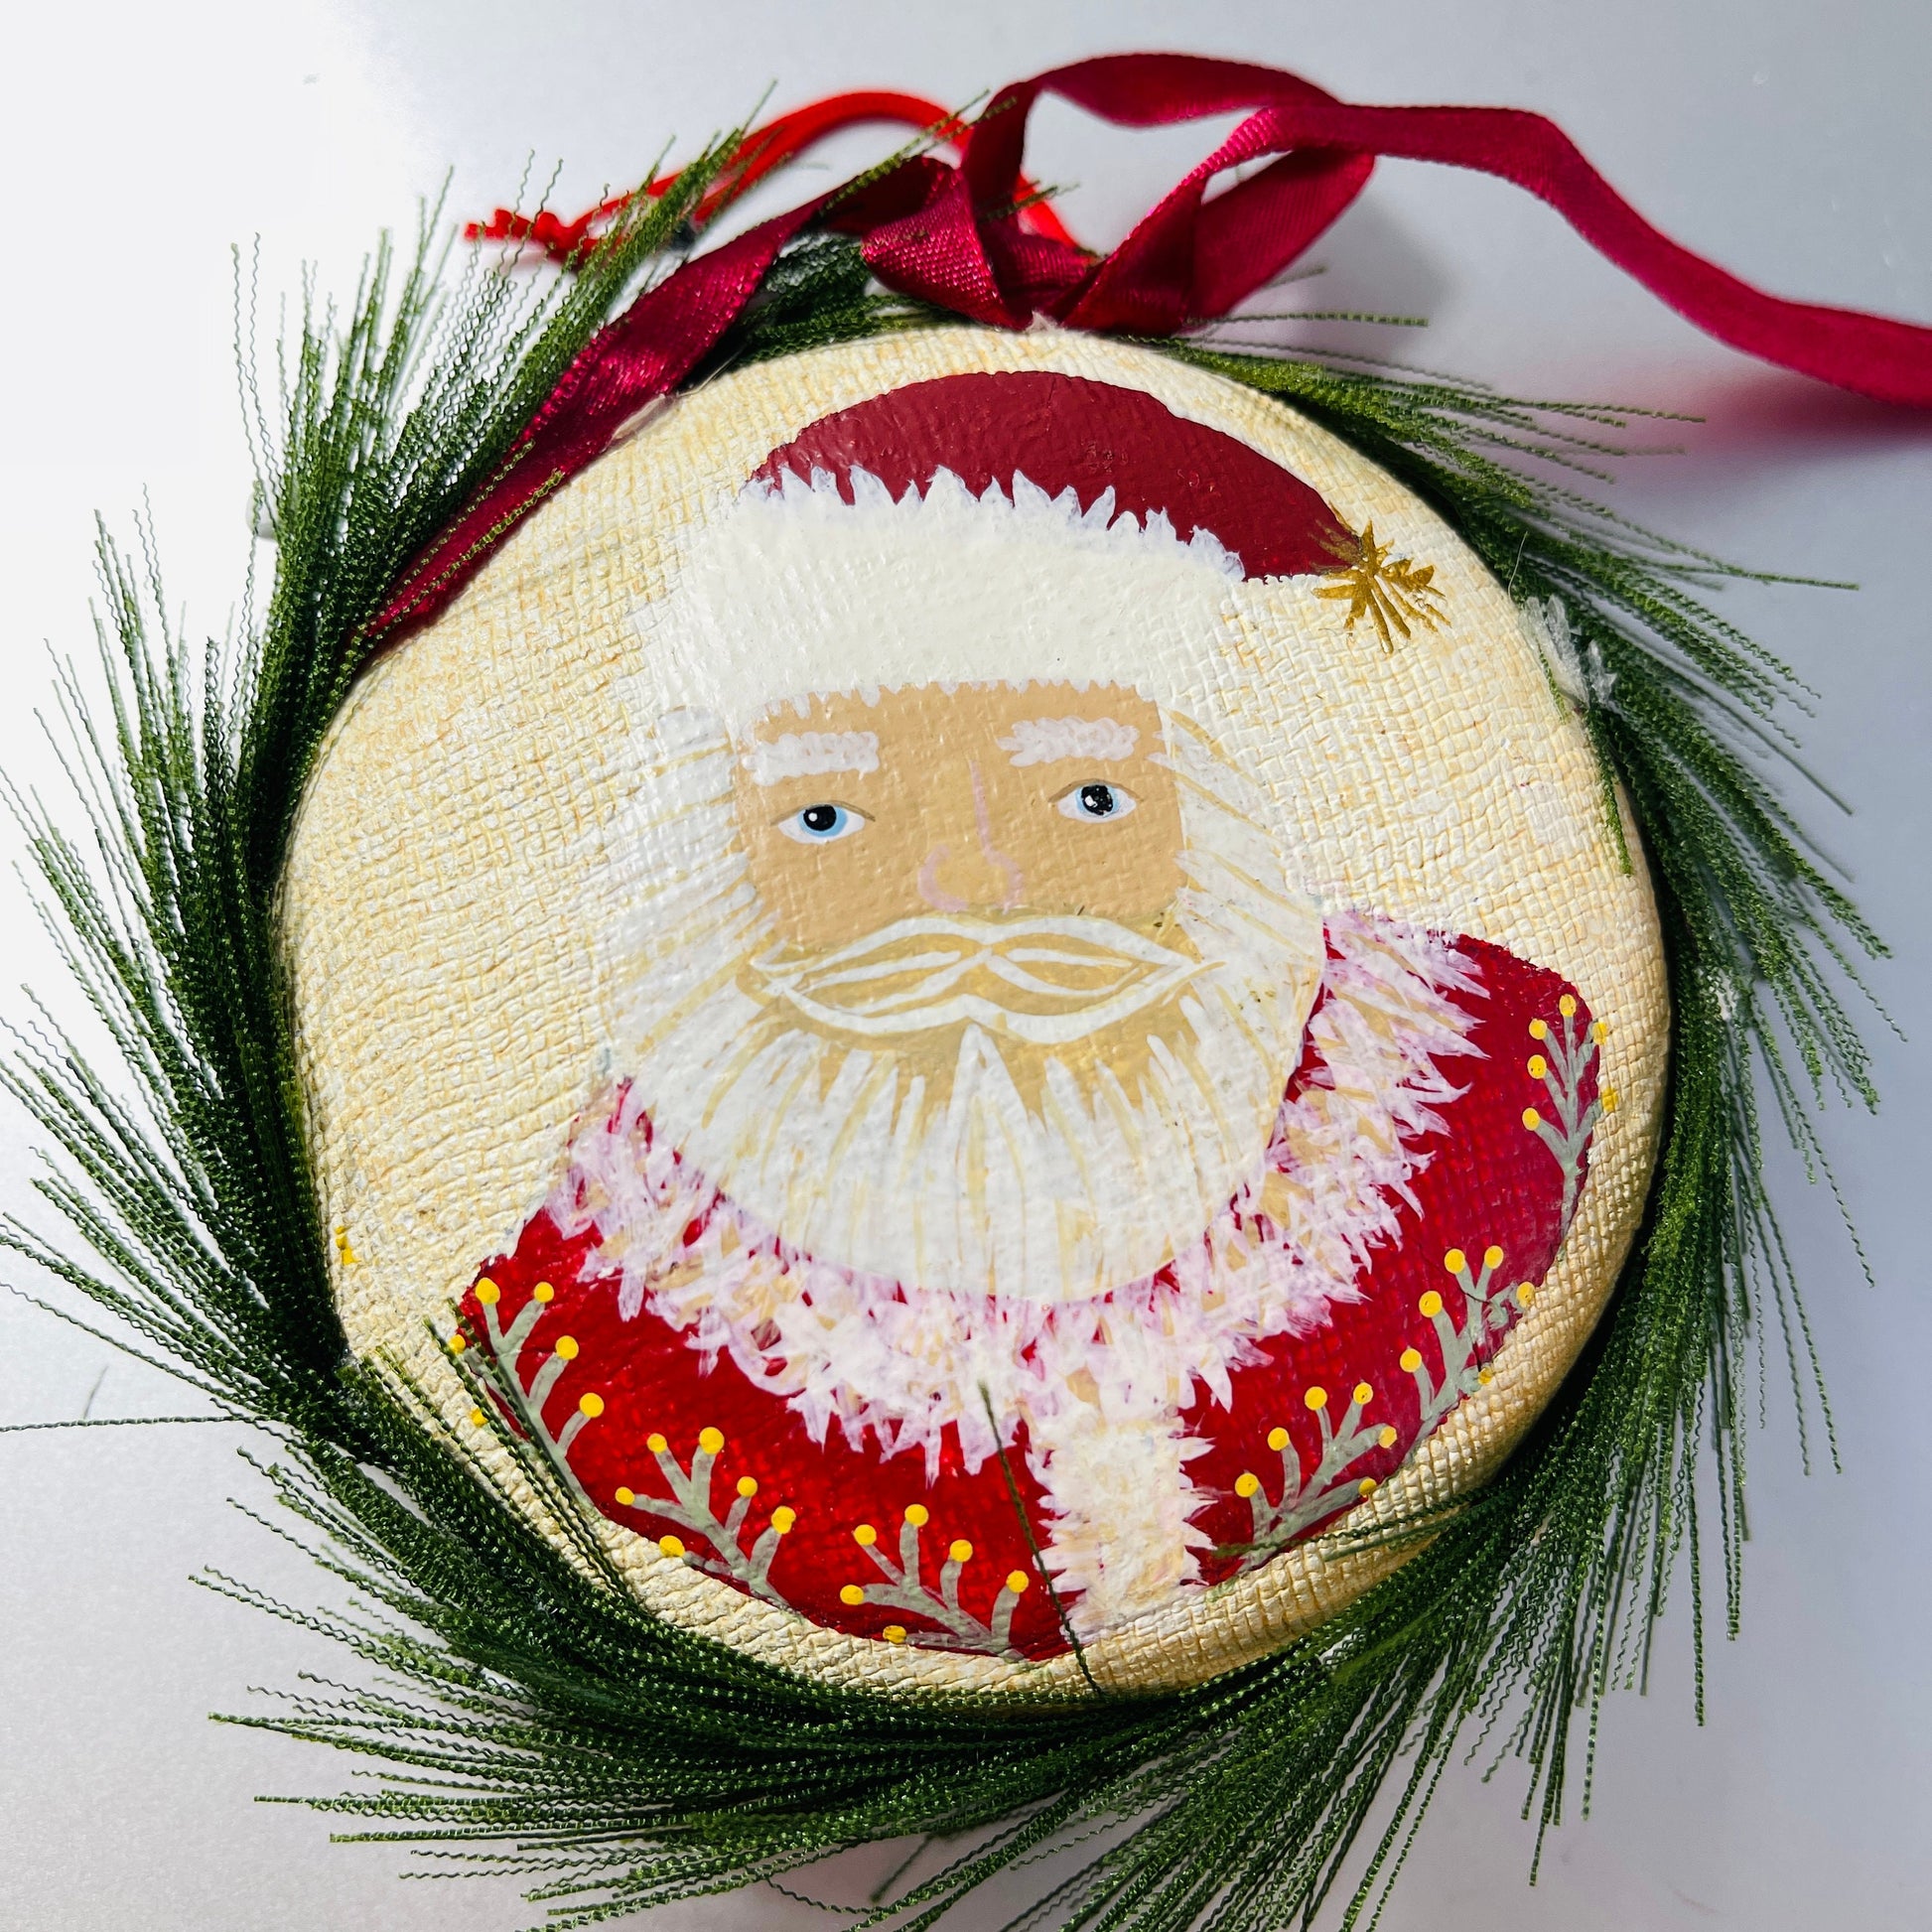 Painted Santa Face, Seasons Greetings, From Knoxville TN, Souvenir Collectible Ornament